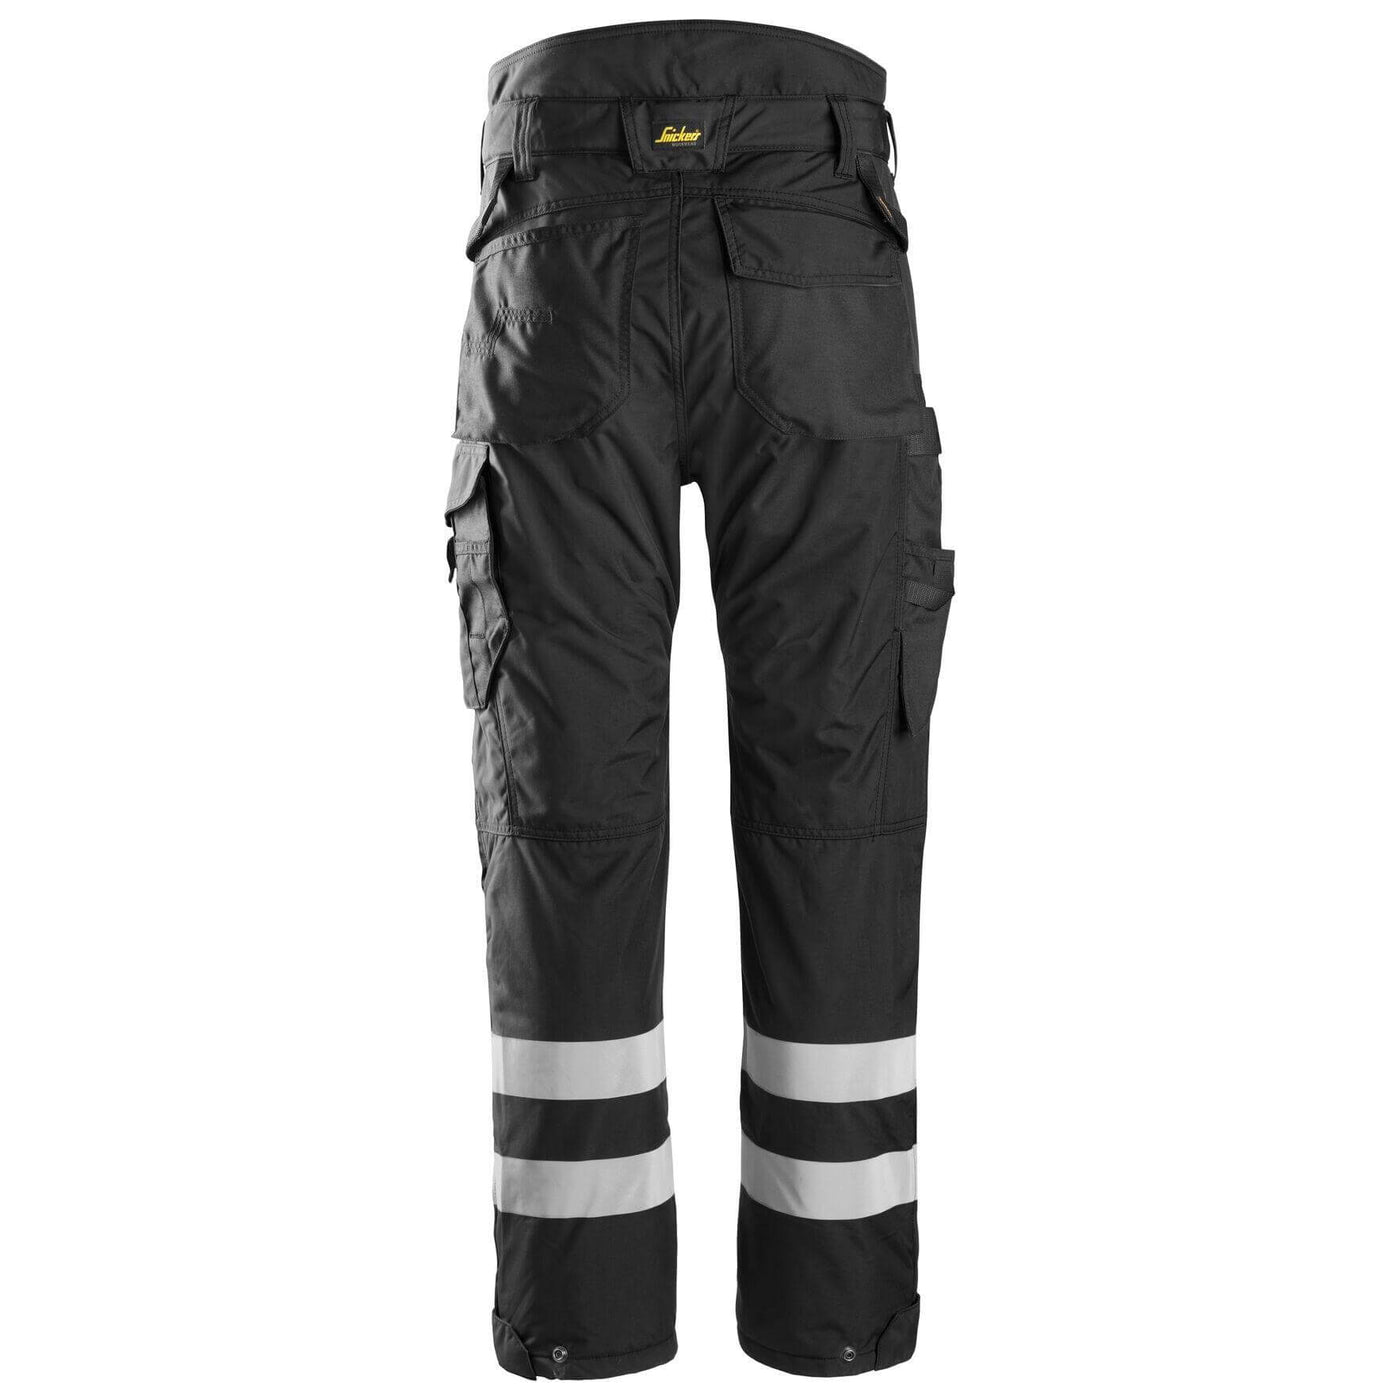 Snickers 6619 AllroundWork 37.5 Insulated Lined Trousers Black Black back #colour_black-black